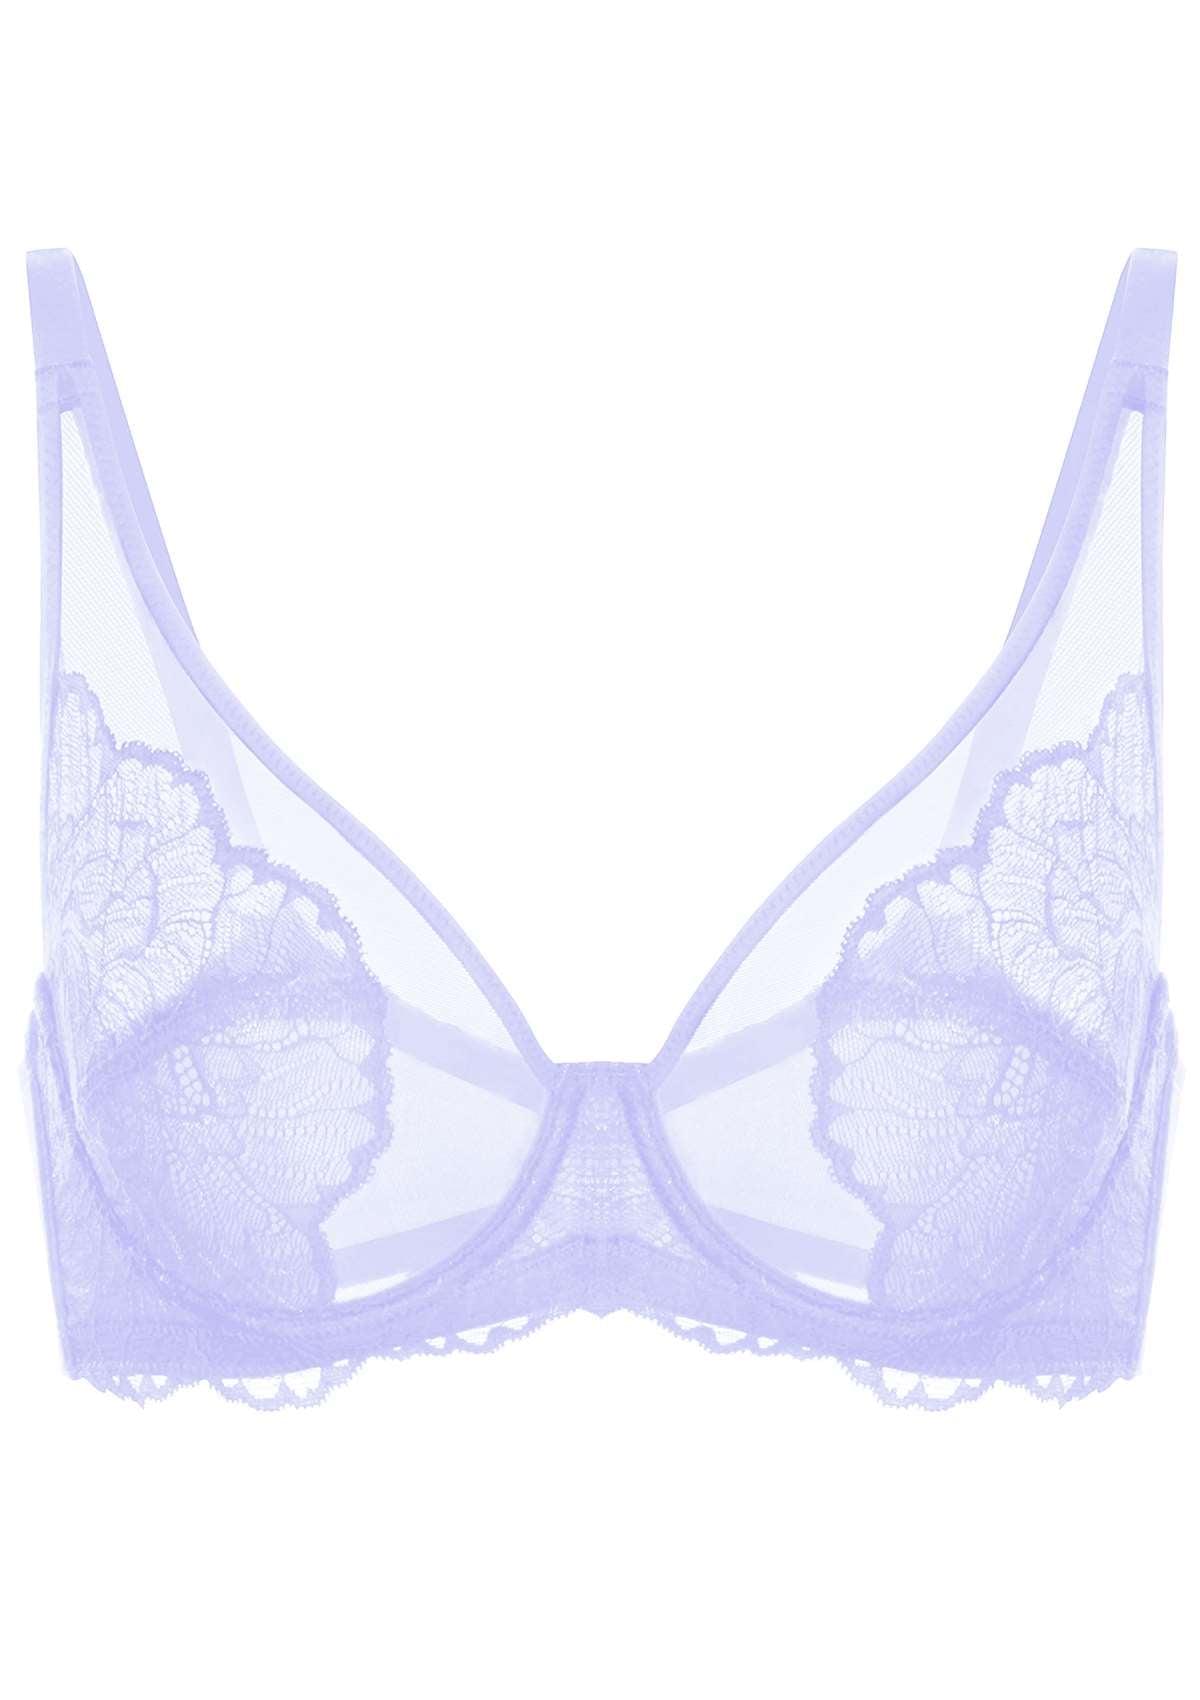 HSIA Blossom Transparent Lace Bra: Plus Size Wired Back Smoothing Bra - Purple / 40 / DDD/F